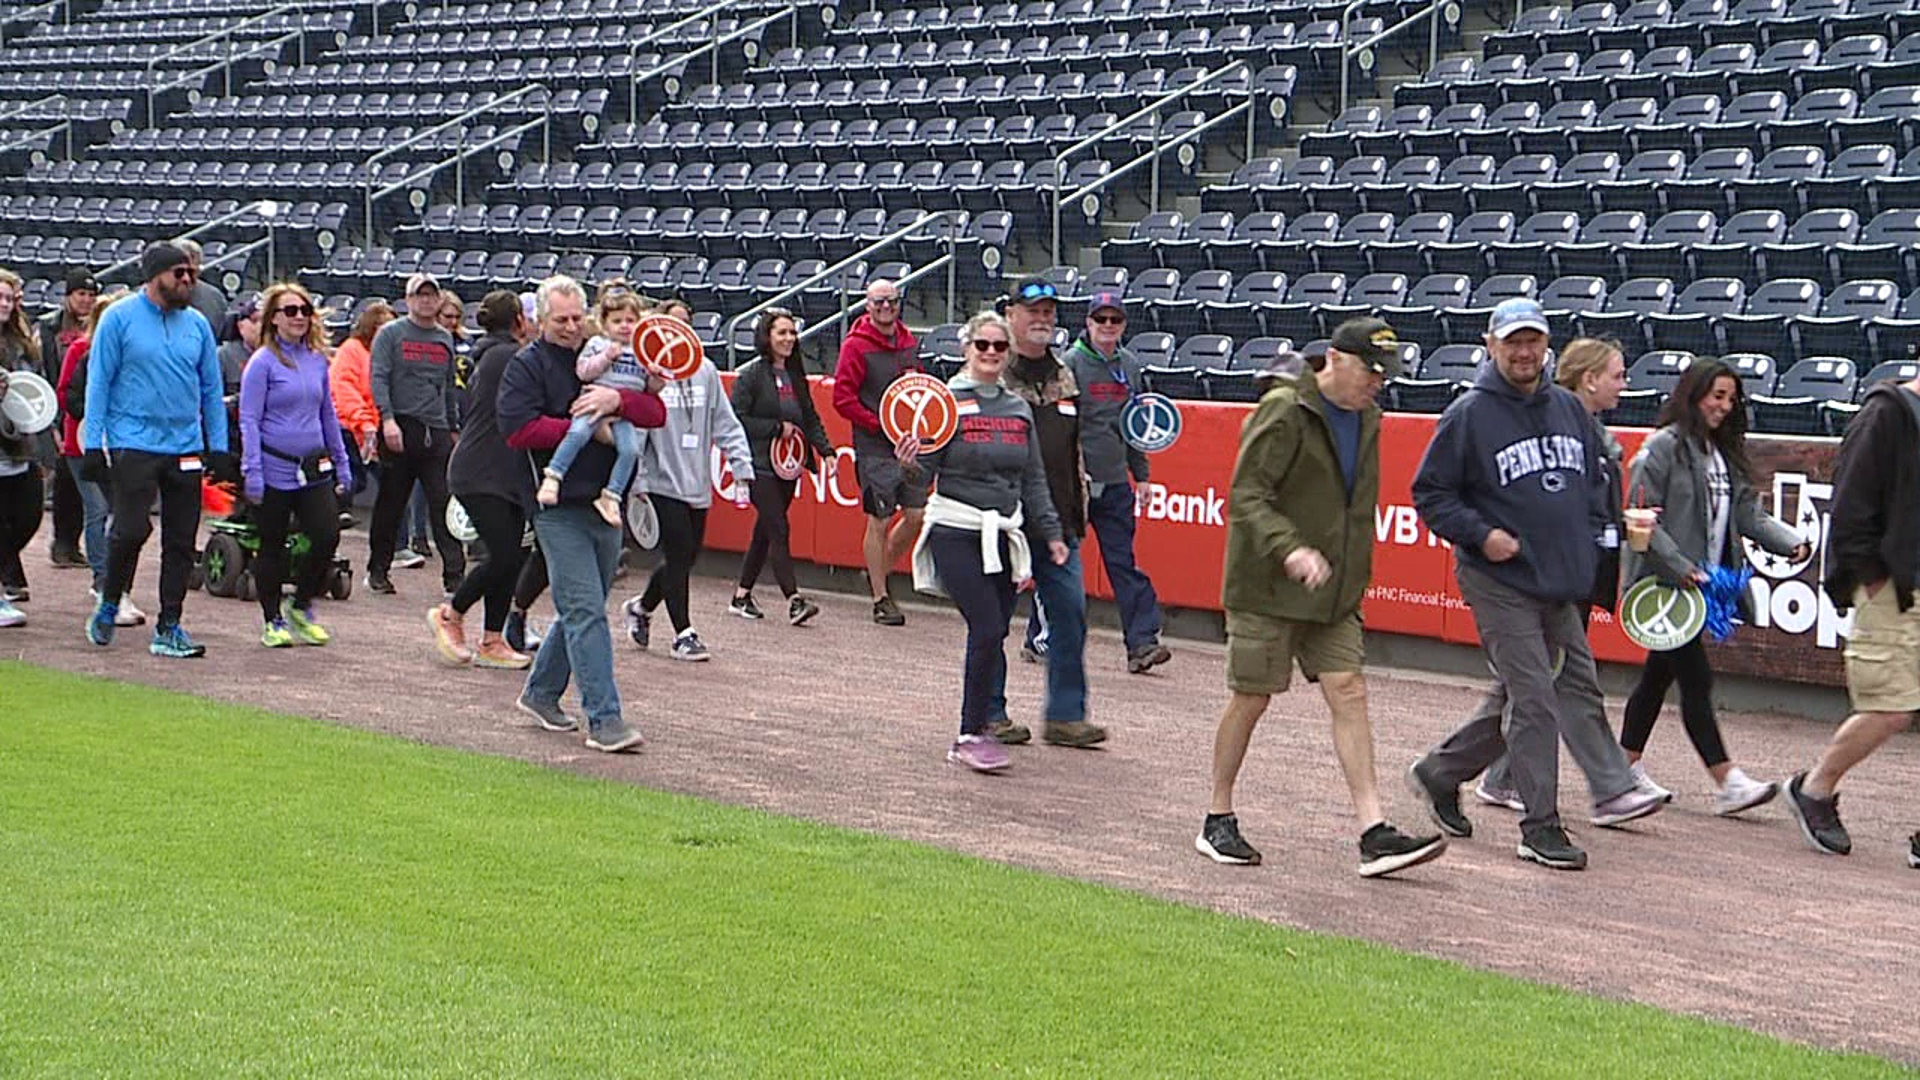 More than 100 people took part in the walk at PNC Field in Moosic to raise money for ALS United Mid-Atlantic.